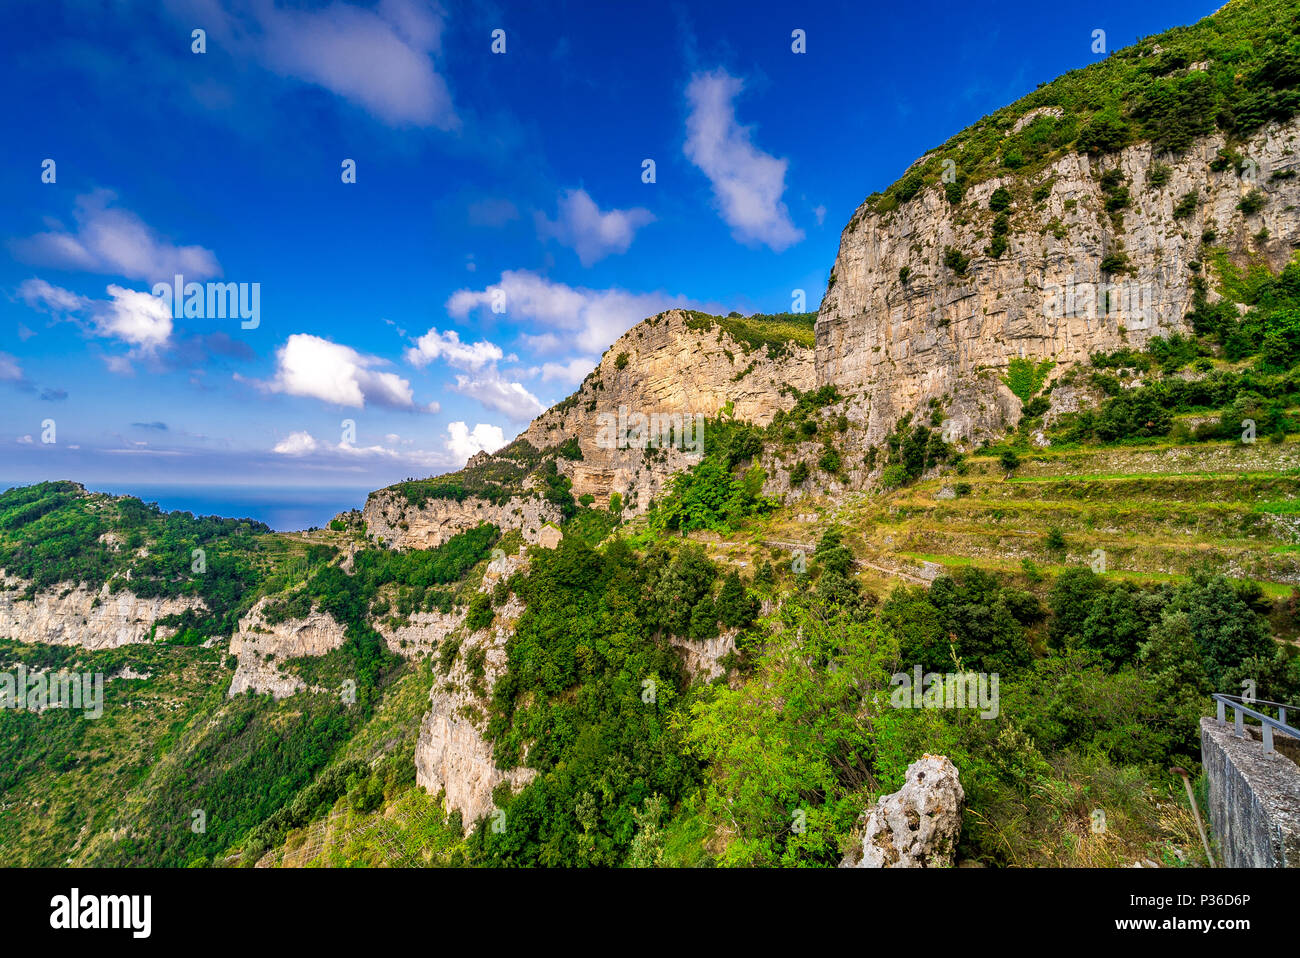 The Walk of the Gods is also known as the Path of the Gods and offers stunning views of the Amalfi Coast. Stock Photo